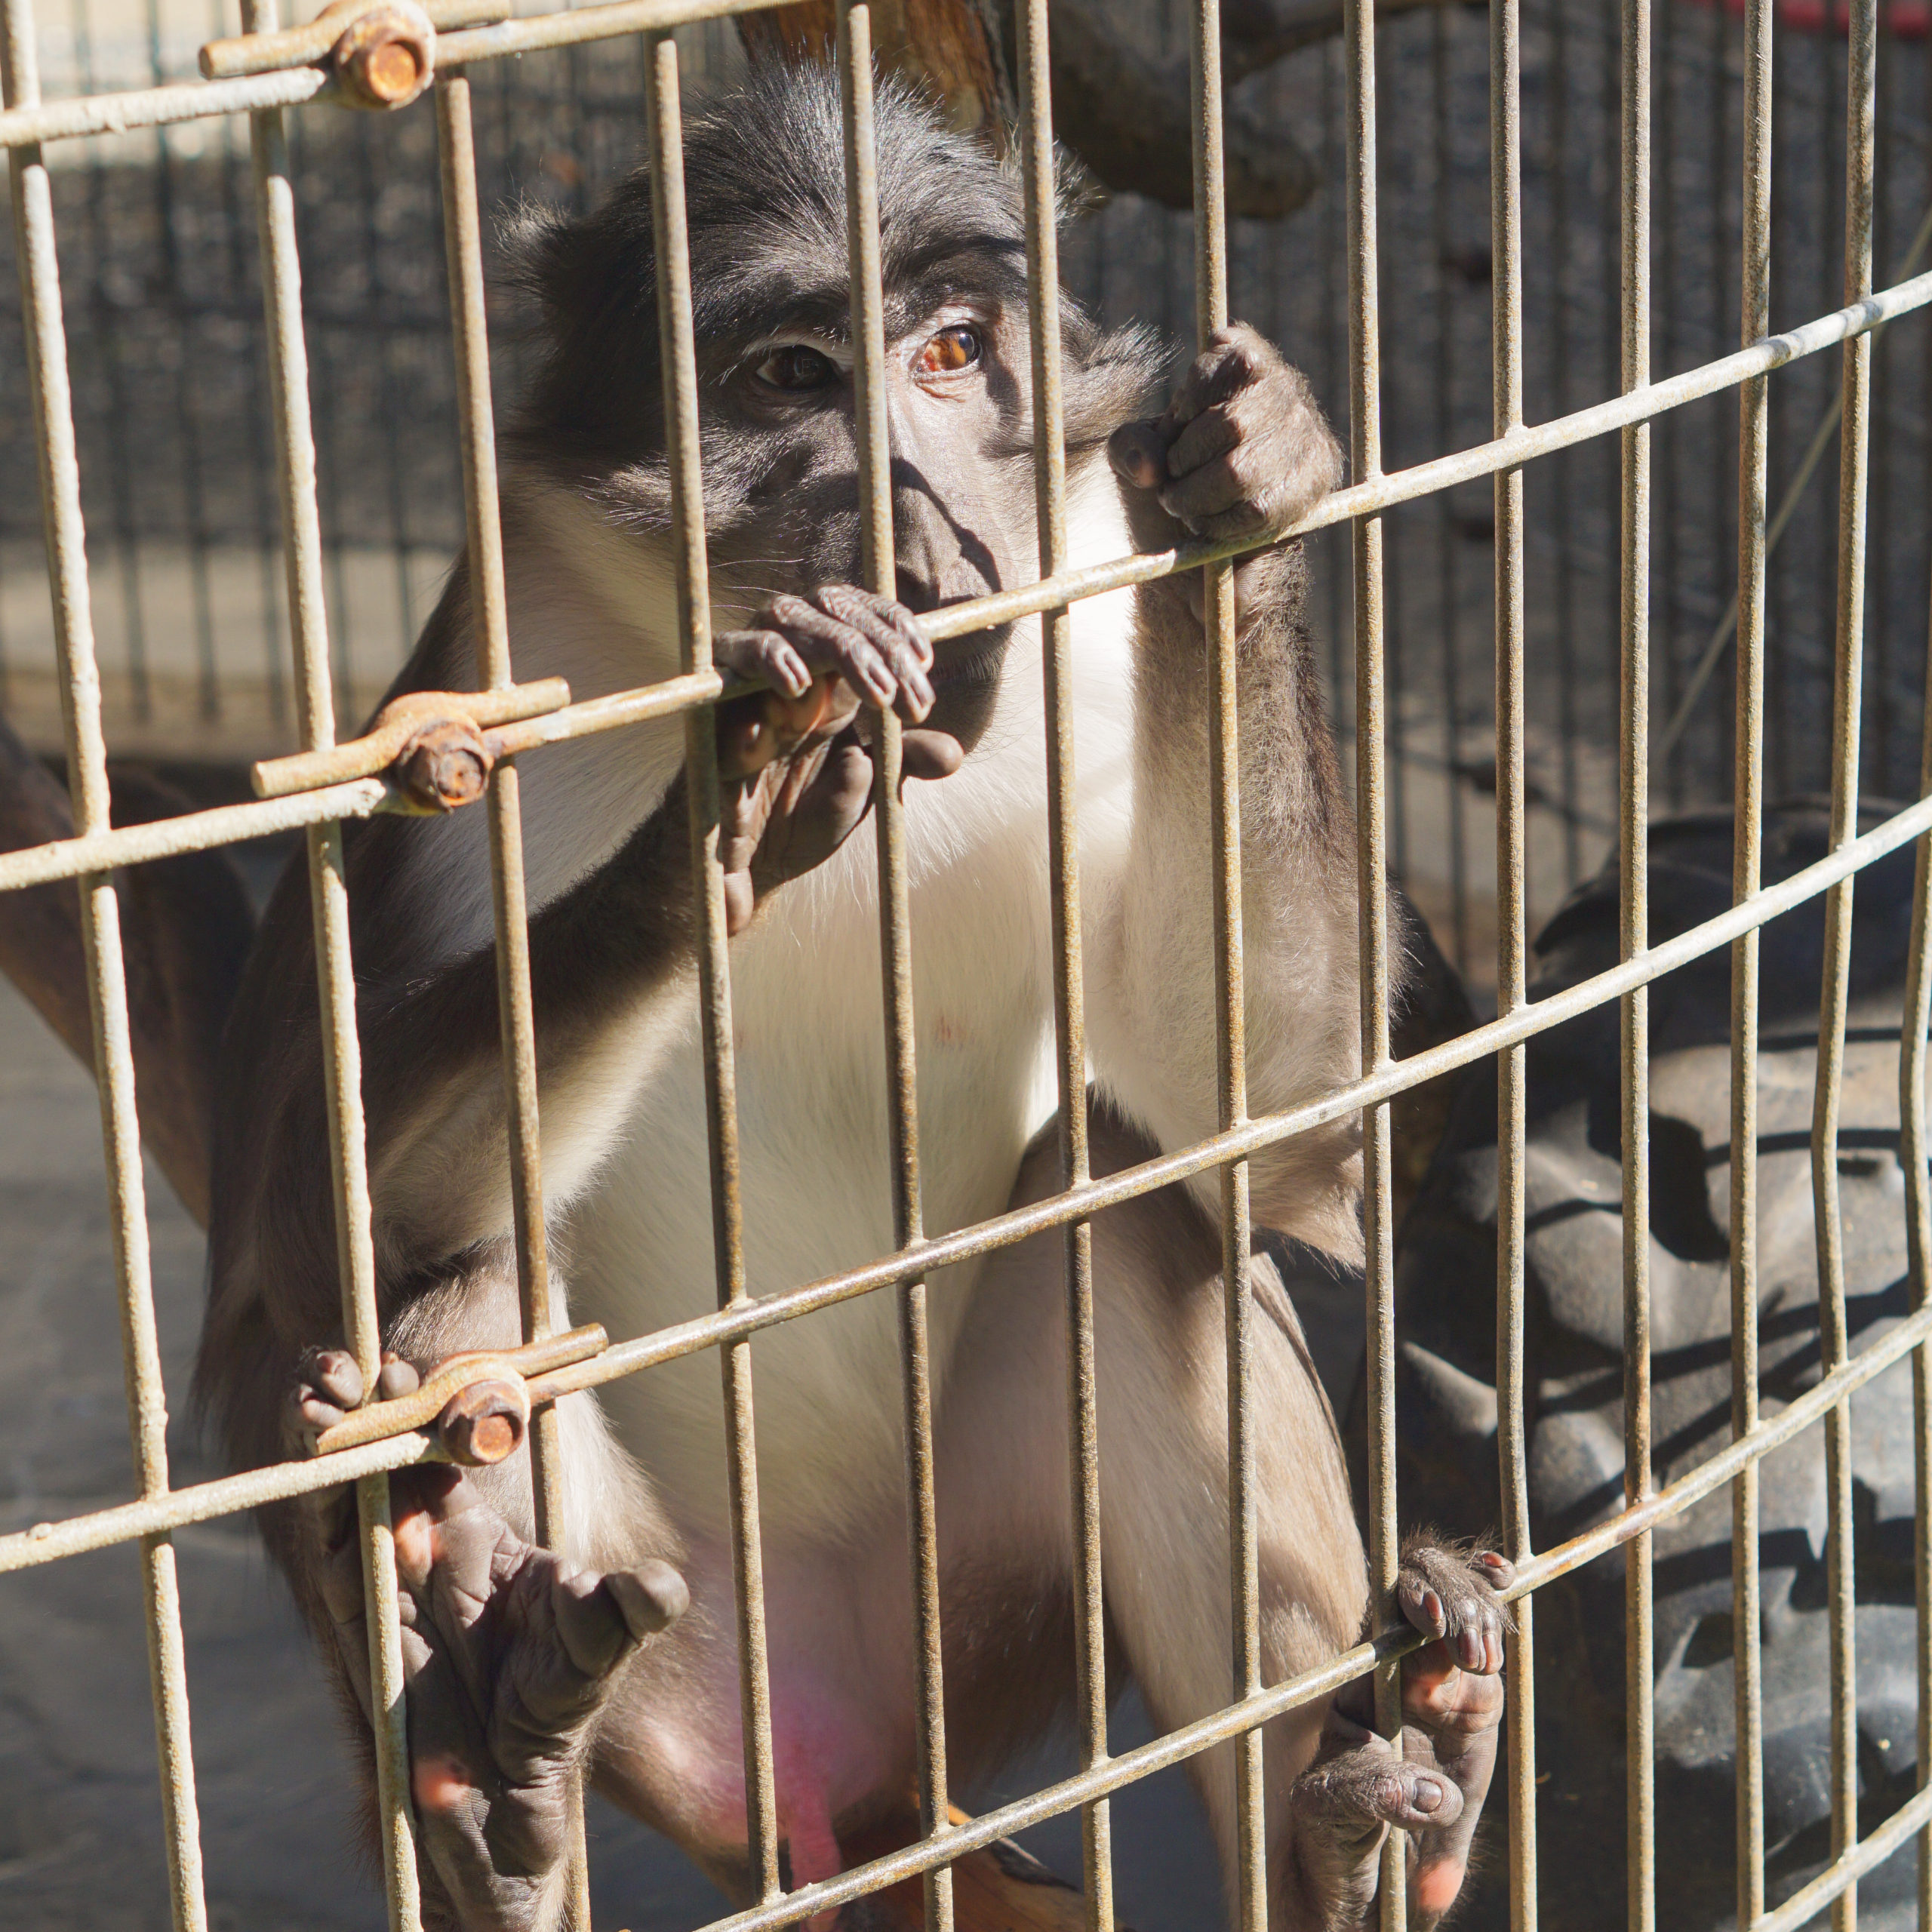 Monkey trapped in a cage at a roadside zoo